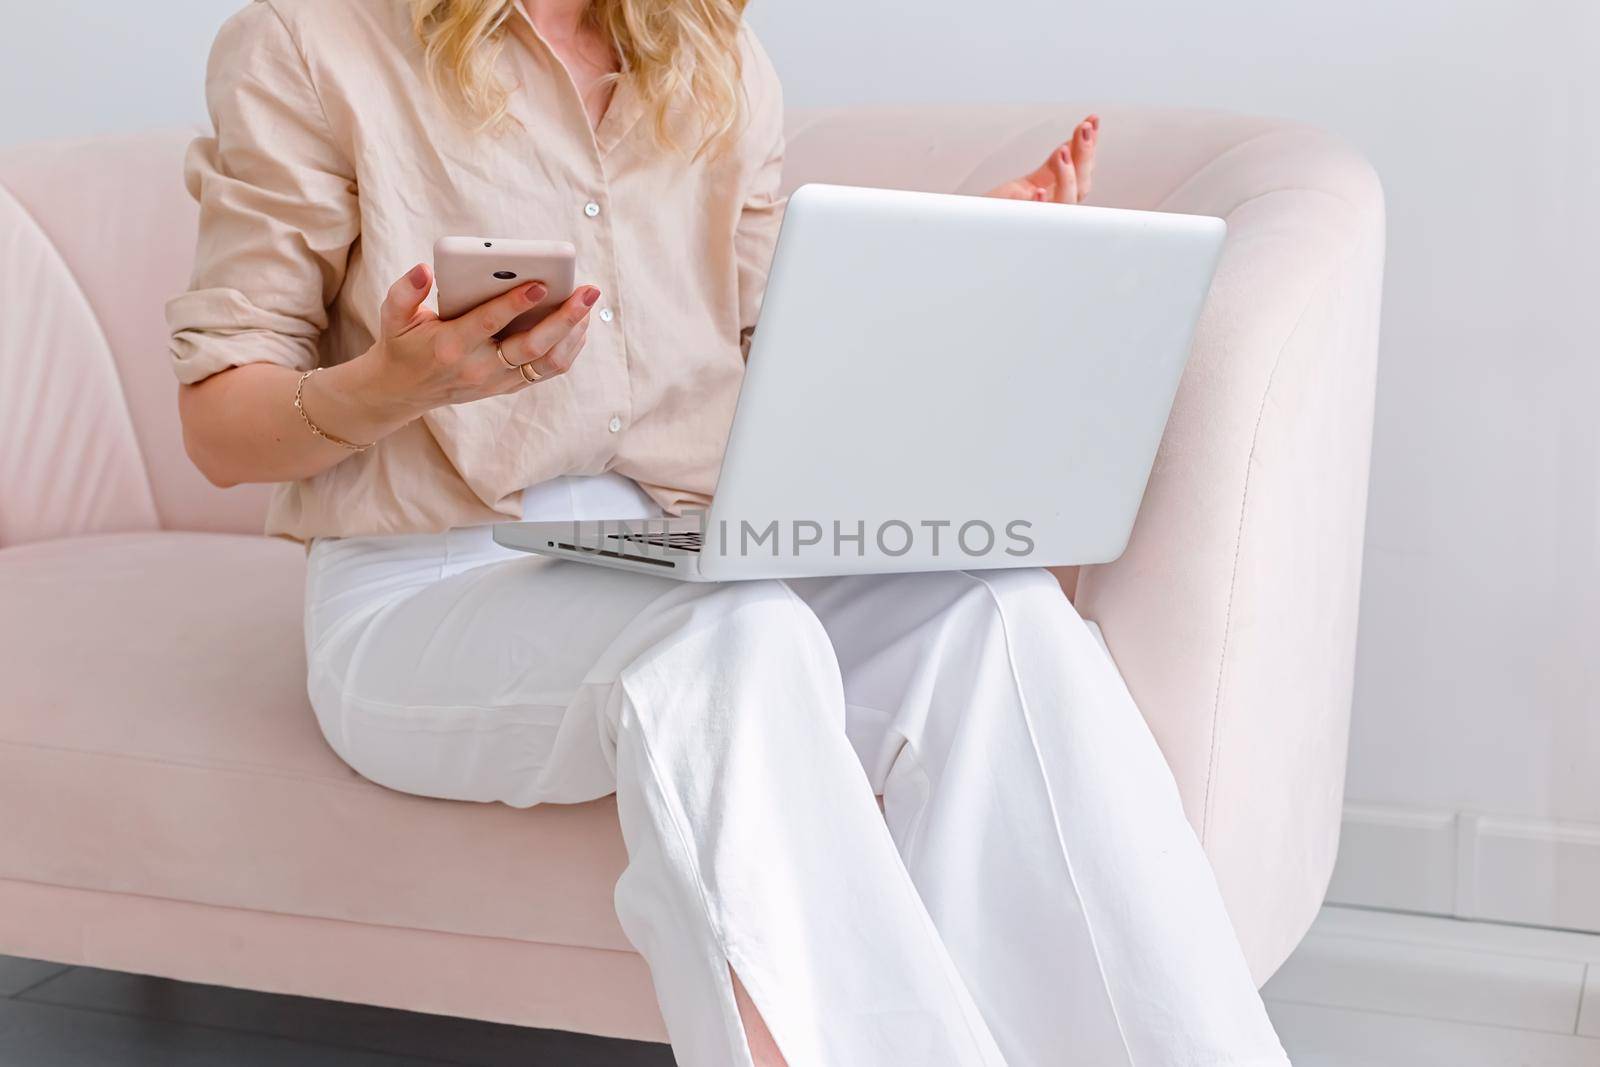 A business woman in light clothes, sits on a light pink sofa, with a gray open laptop on her knees, holds a pink smartphone in her hand, close-up